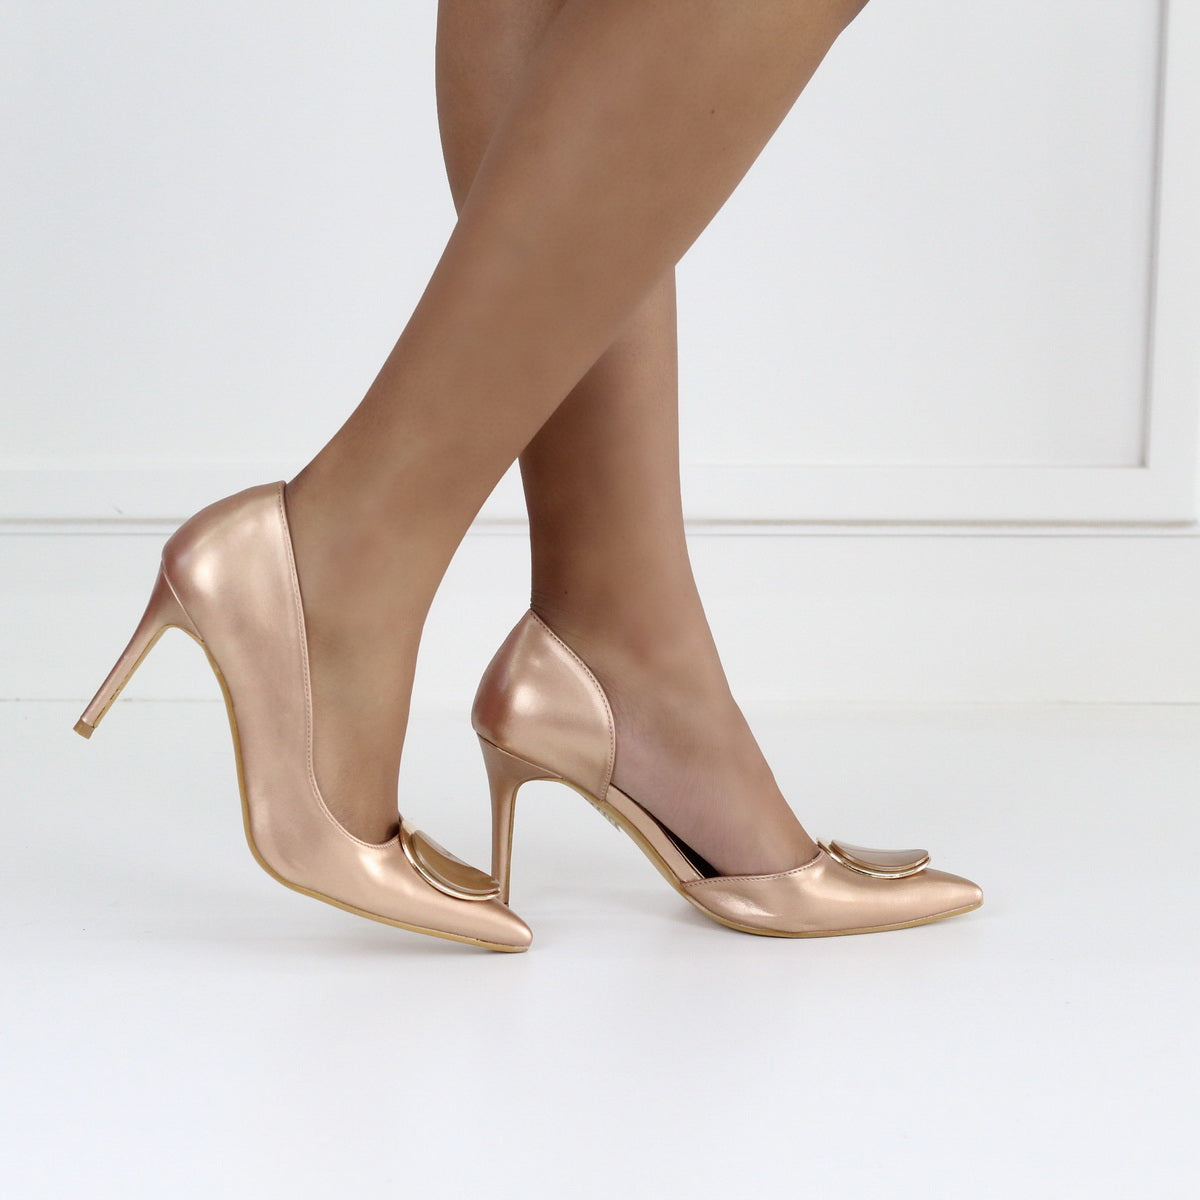 Rose gold 9cm heel open side court shoe with a gold trim daniella